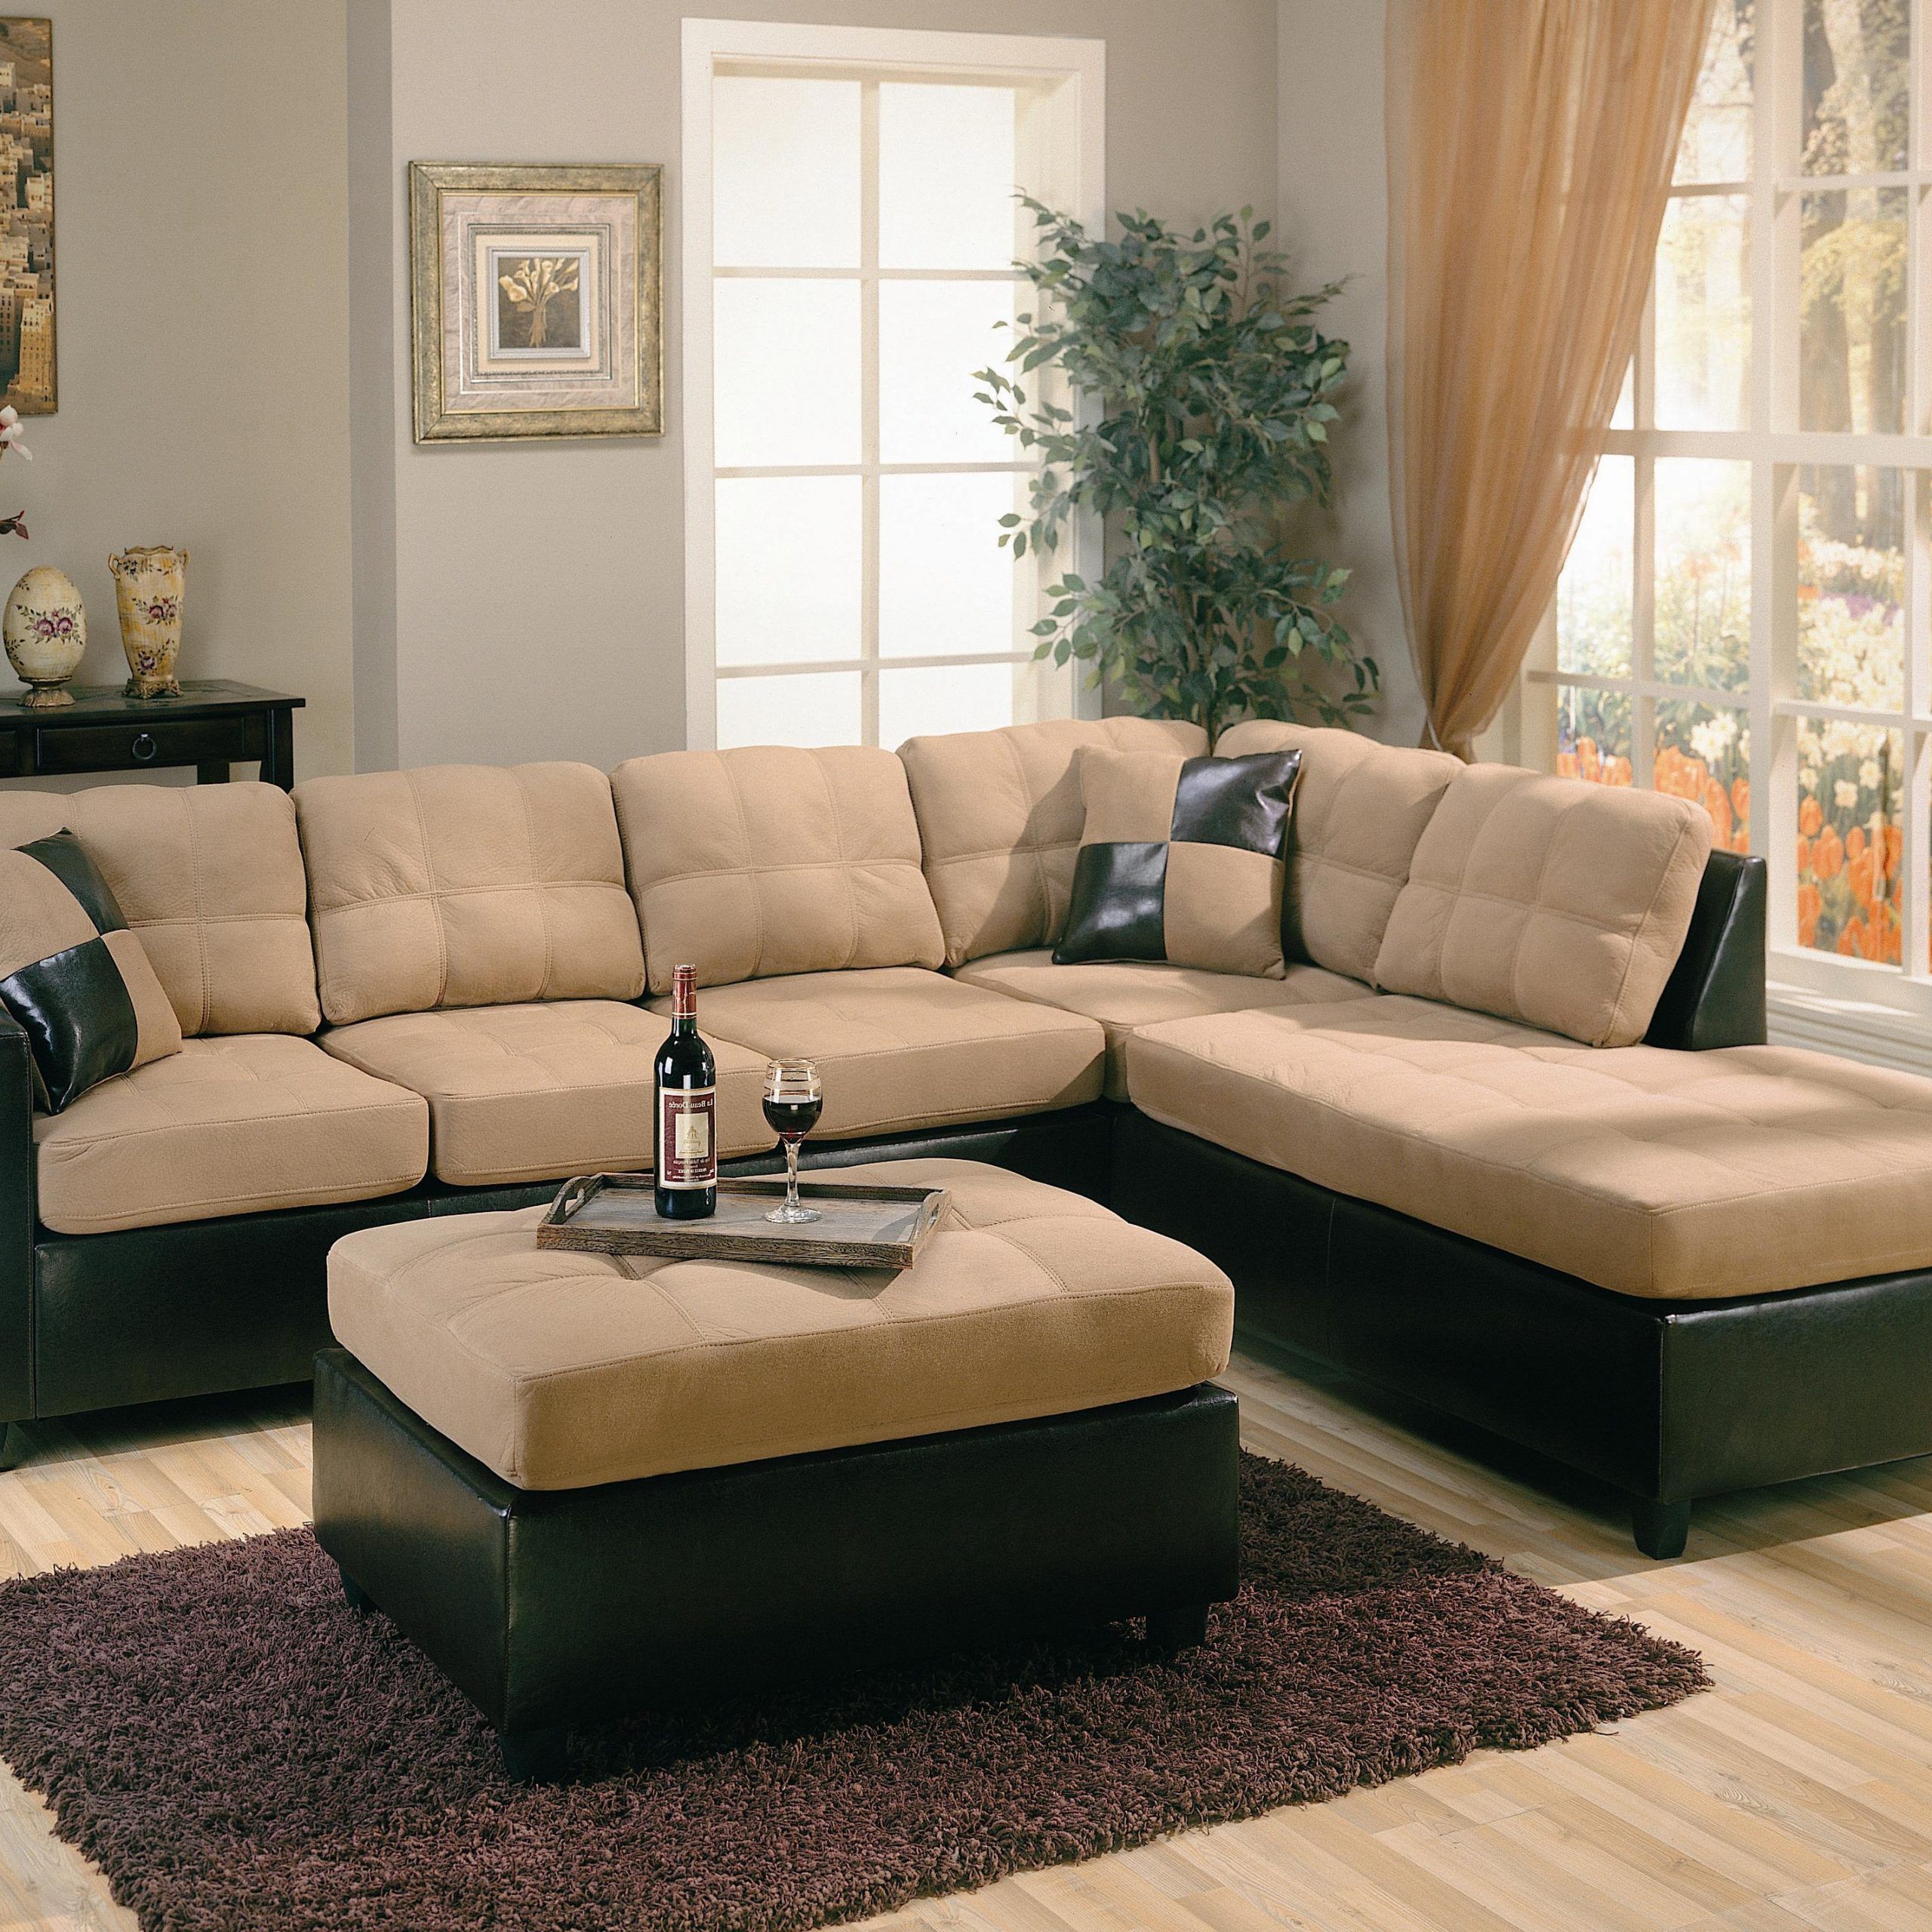 Page Title Inside Bonded Leather All In One Sectional Sofas With Ottoman And 2 Pillows Brown (View 10 of 15)